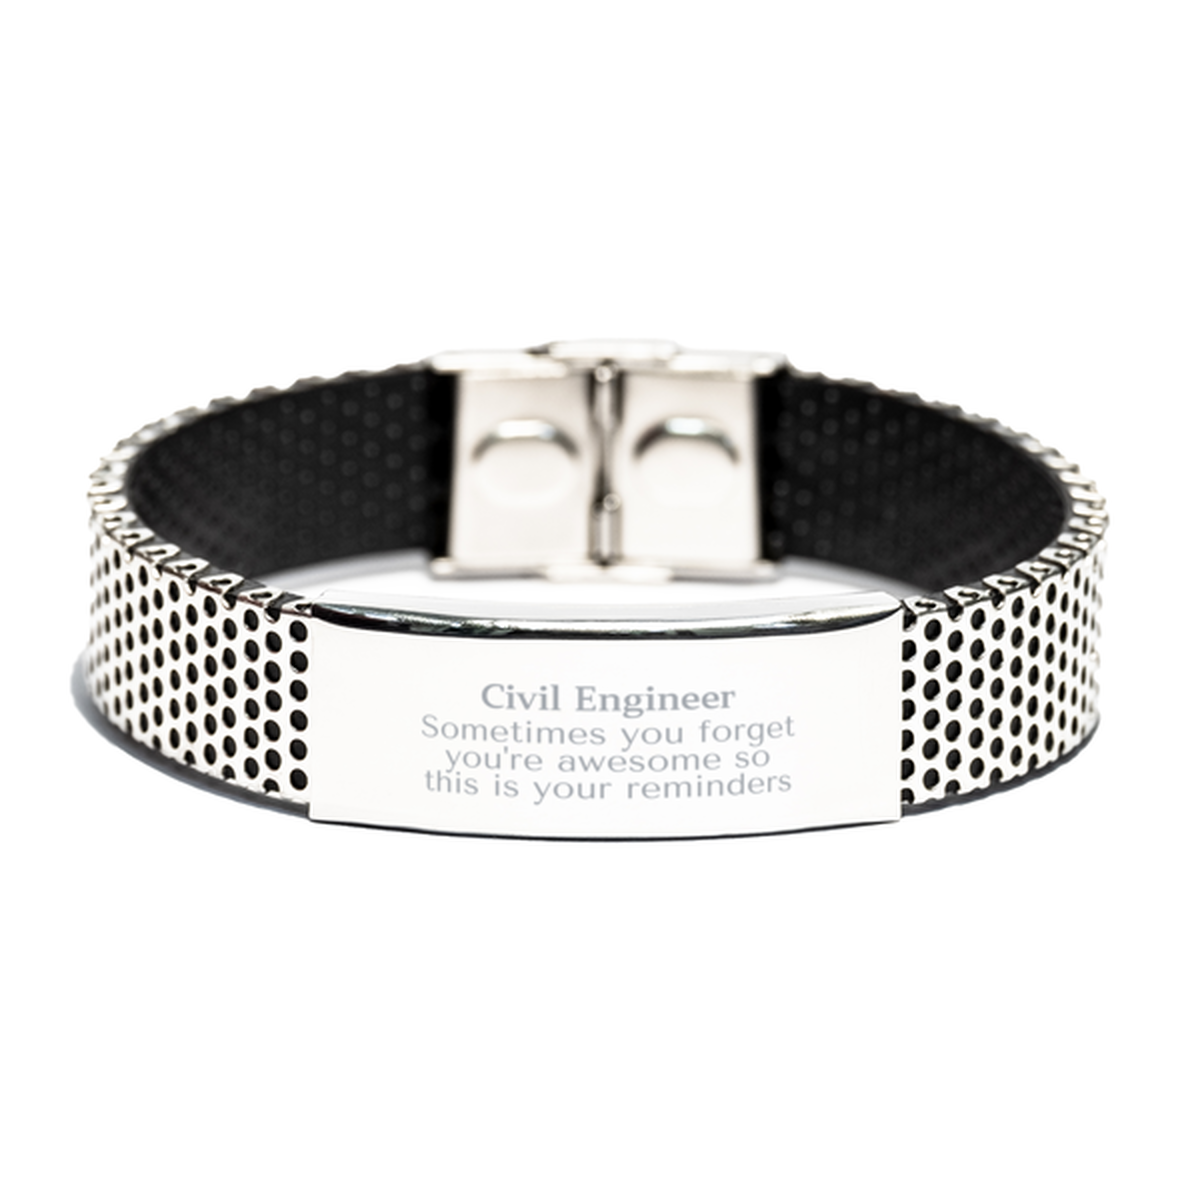 Sentimental Civil Engineer Stainless Steel Bracelet, Civil Engineer Sometimes you forget you're awesome so this is your reminders, Graduation Christmas Birthday Gifts for Civil Engineer, Men, Women, Coworkers